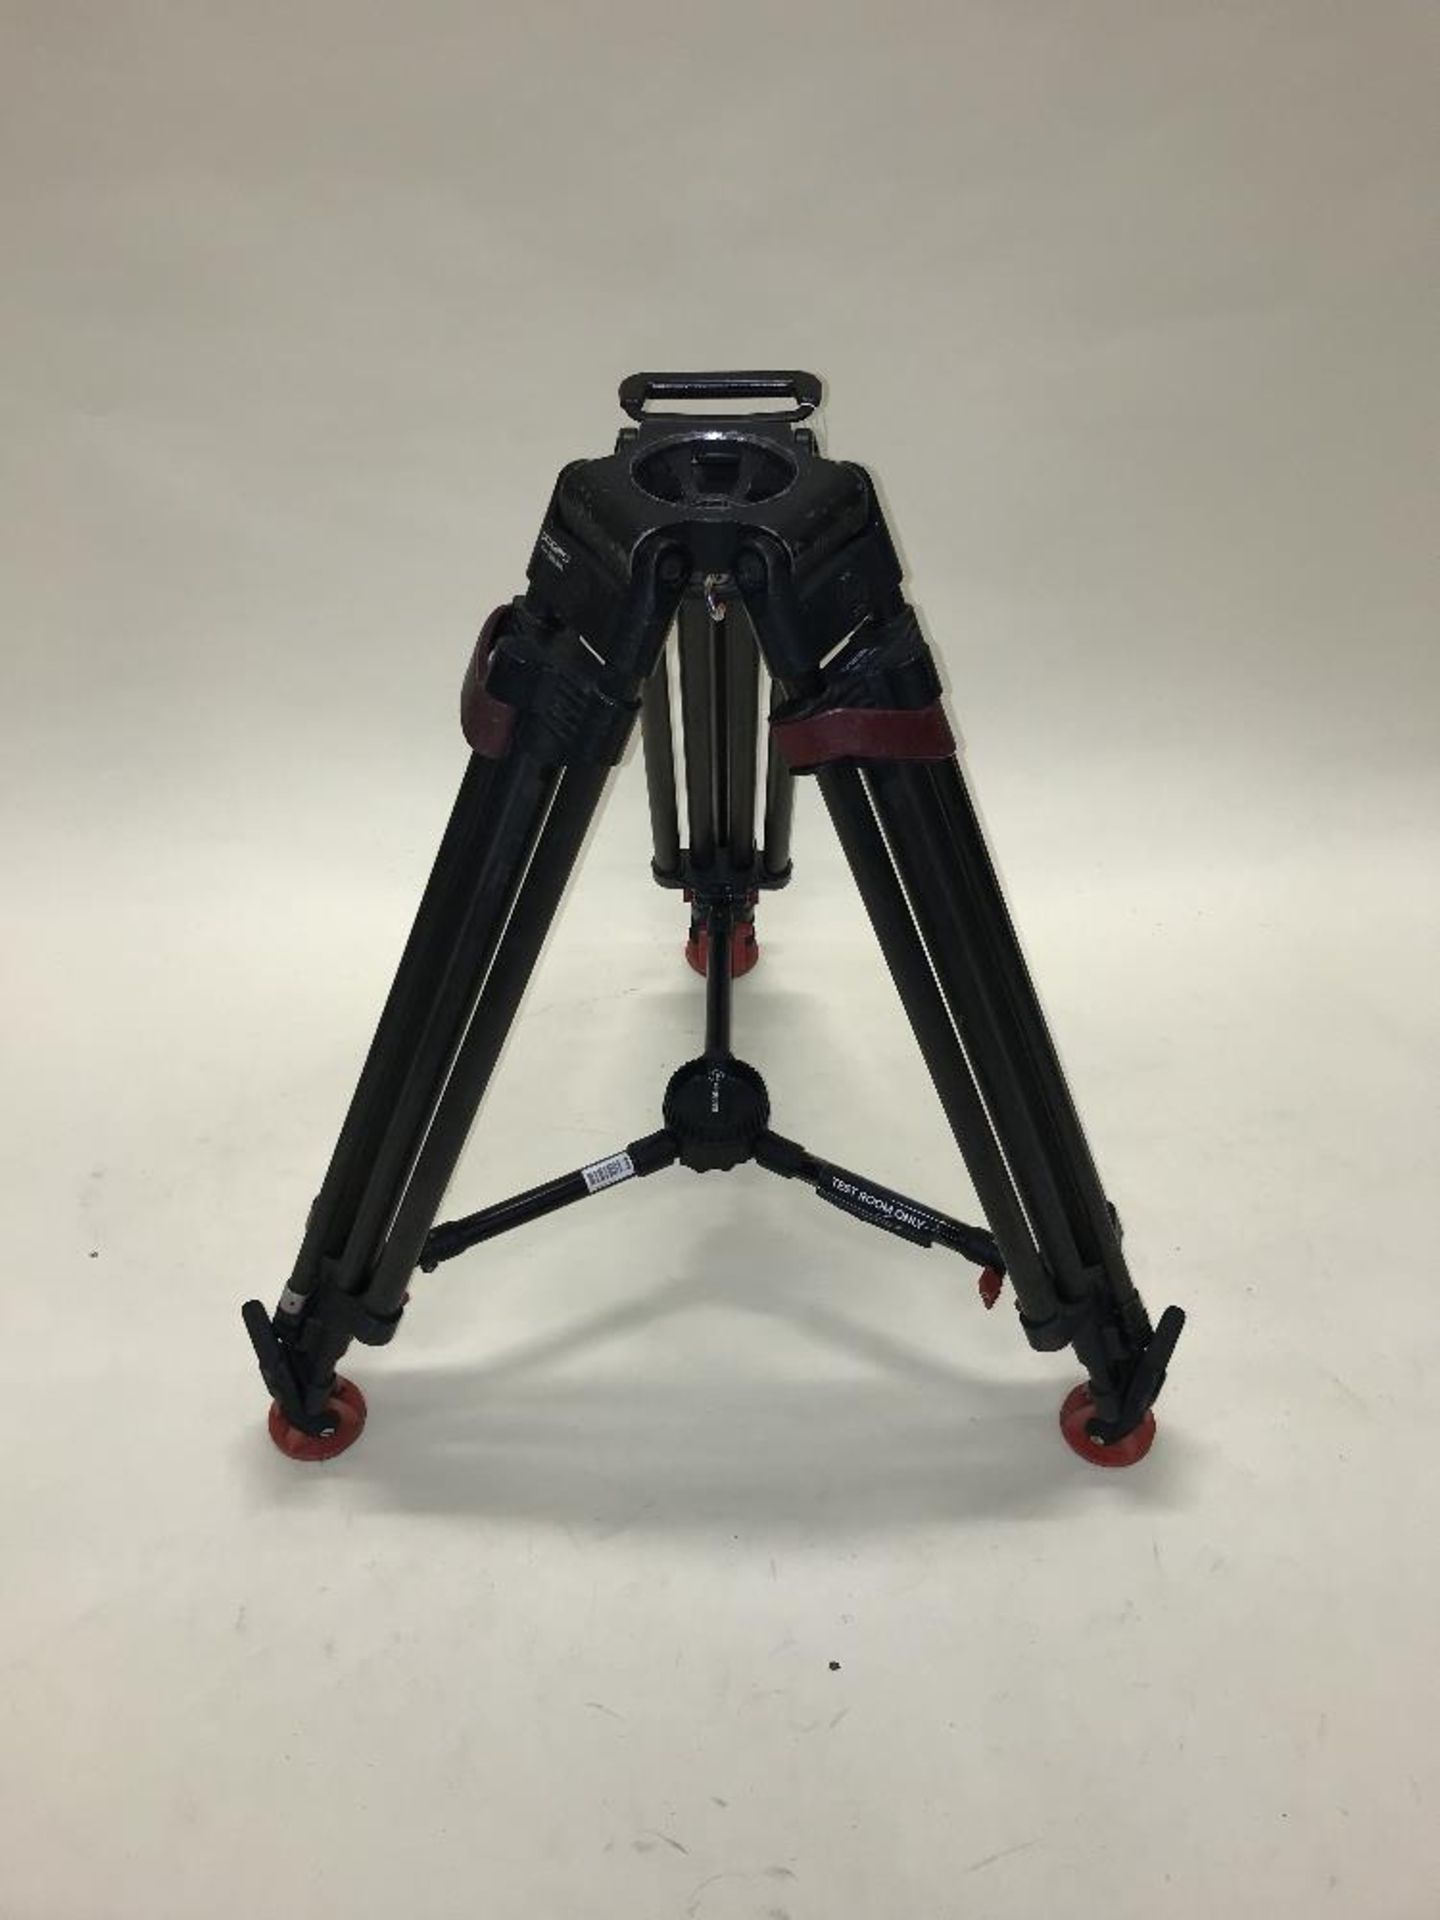 Sachtler SpeedLock Heavy-Duty Carbon Fibre Tripod for 100 mm Fluid Heads with Ground Spreader - Image 2 of 2